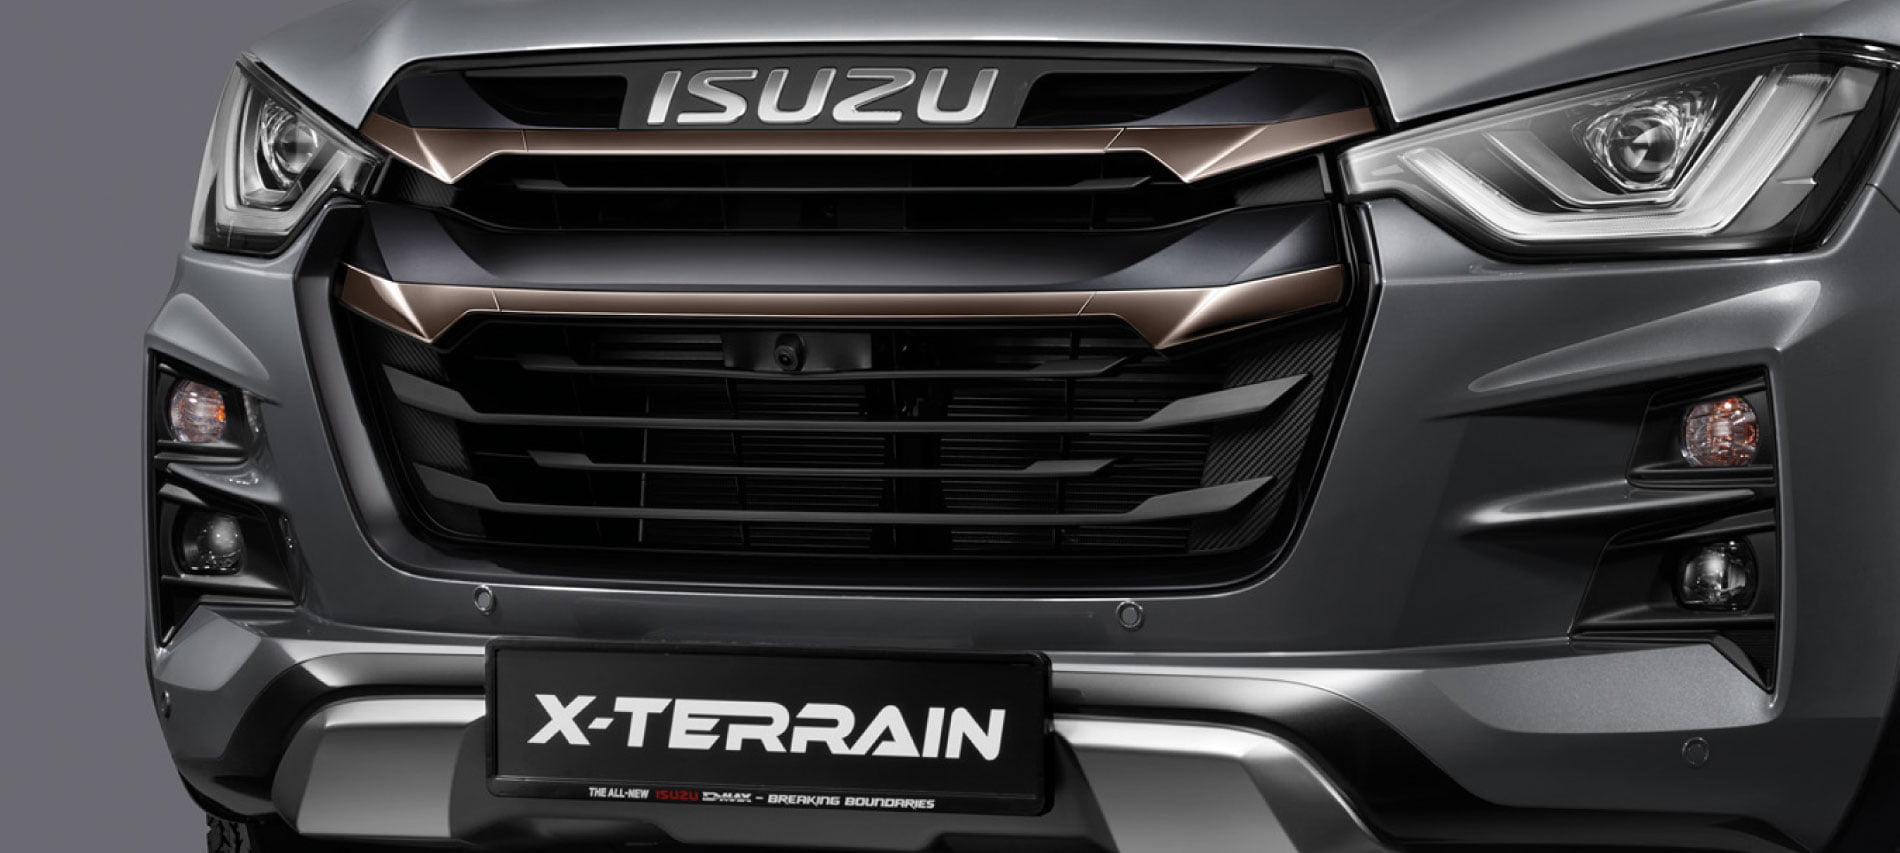 NEW DESIGN OF FRONT GRILLE